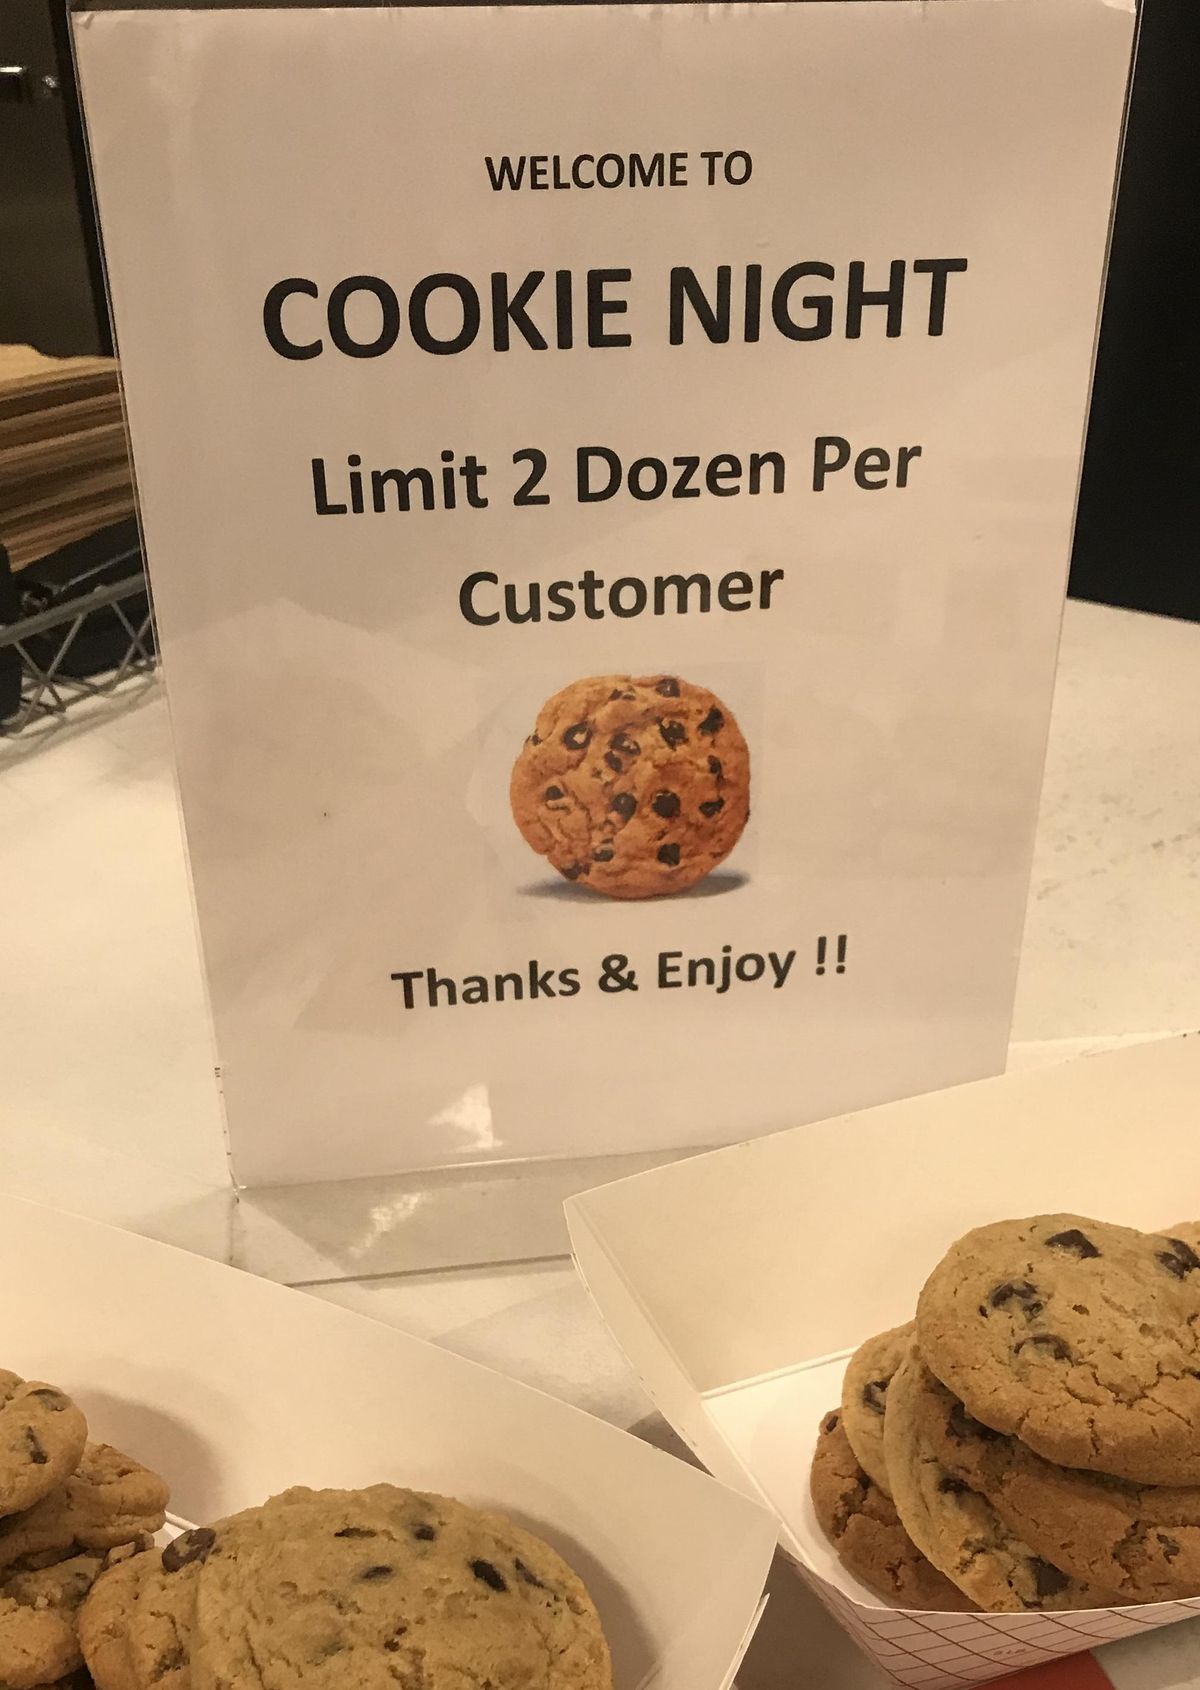 A sign at SubCo reminds students there’s a limit of two dozen cookies per customer during Cookie Night at GU. (Crissy Belle Lubke)